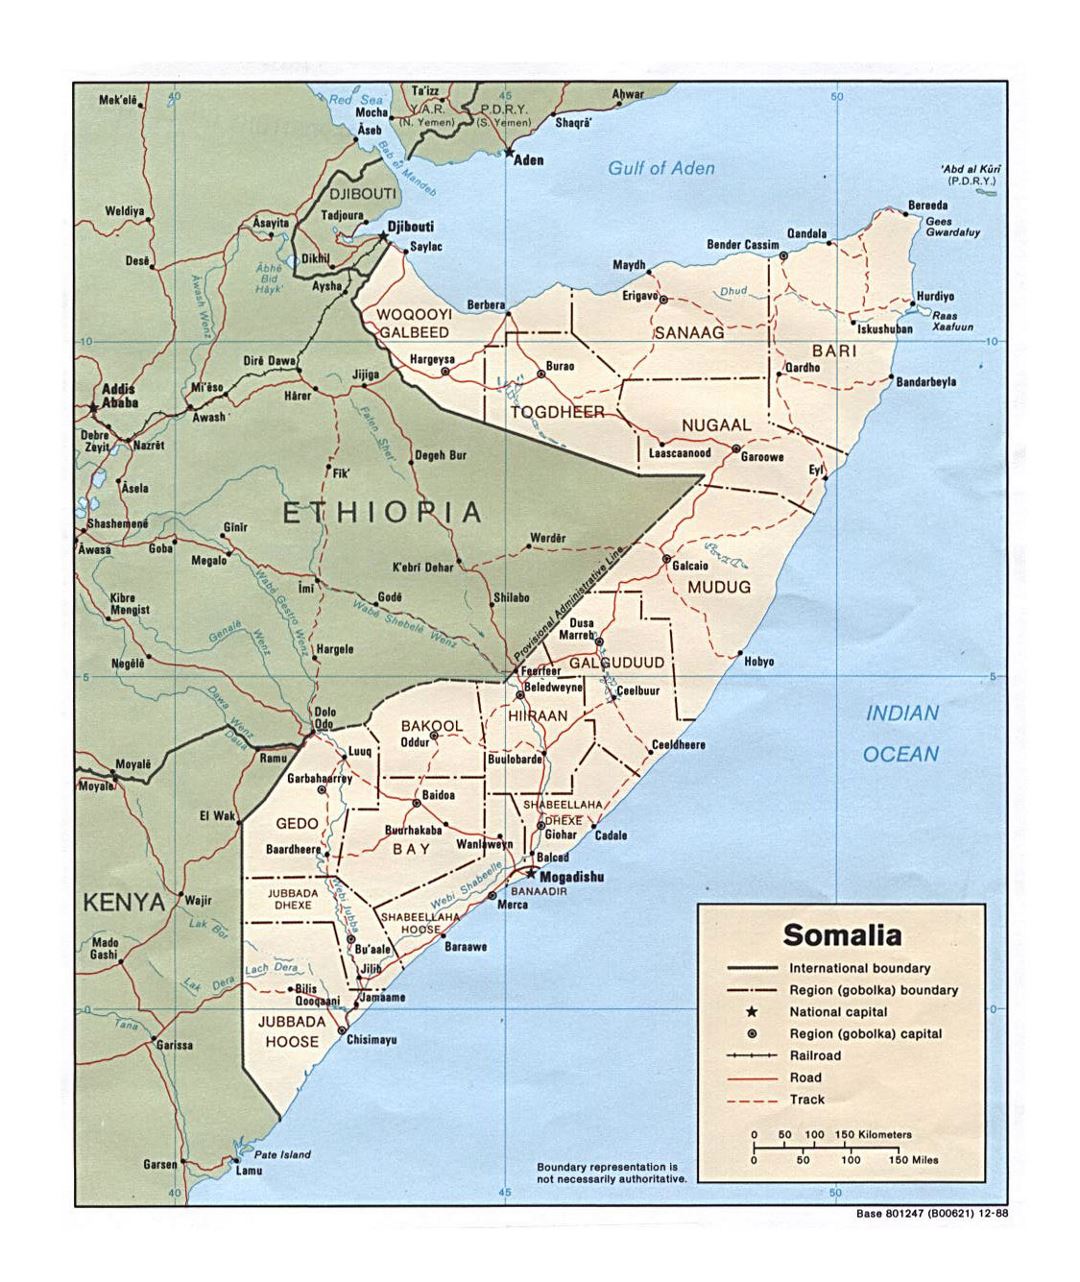 Detailed political and administrative map of Somalia with roads, railroads and cities - 1988